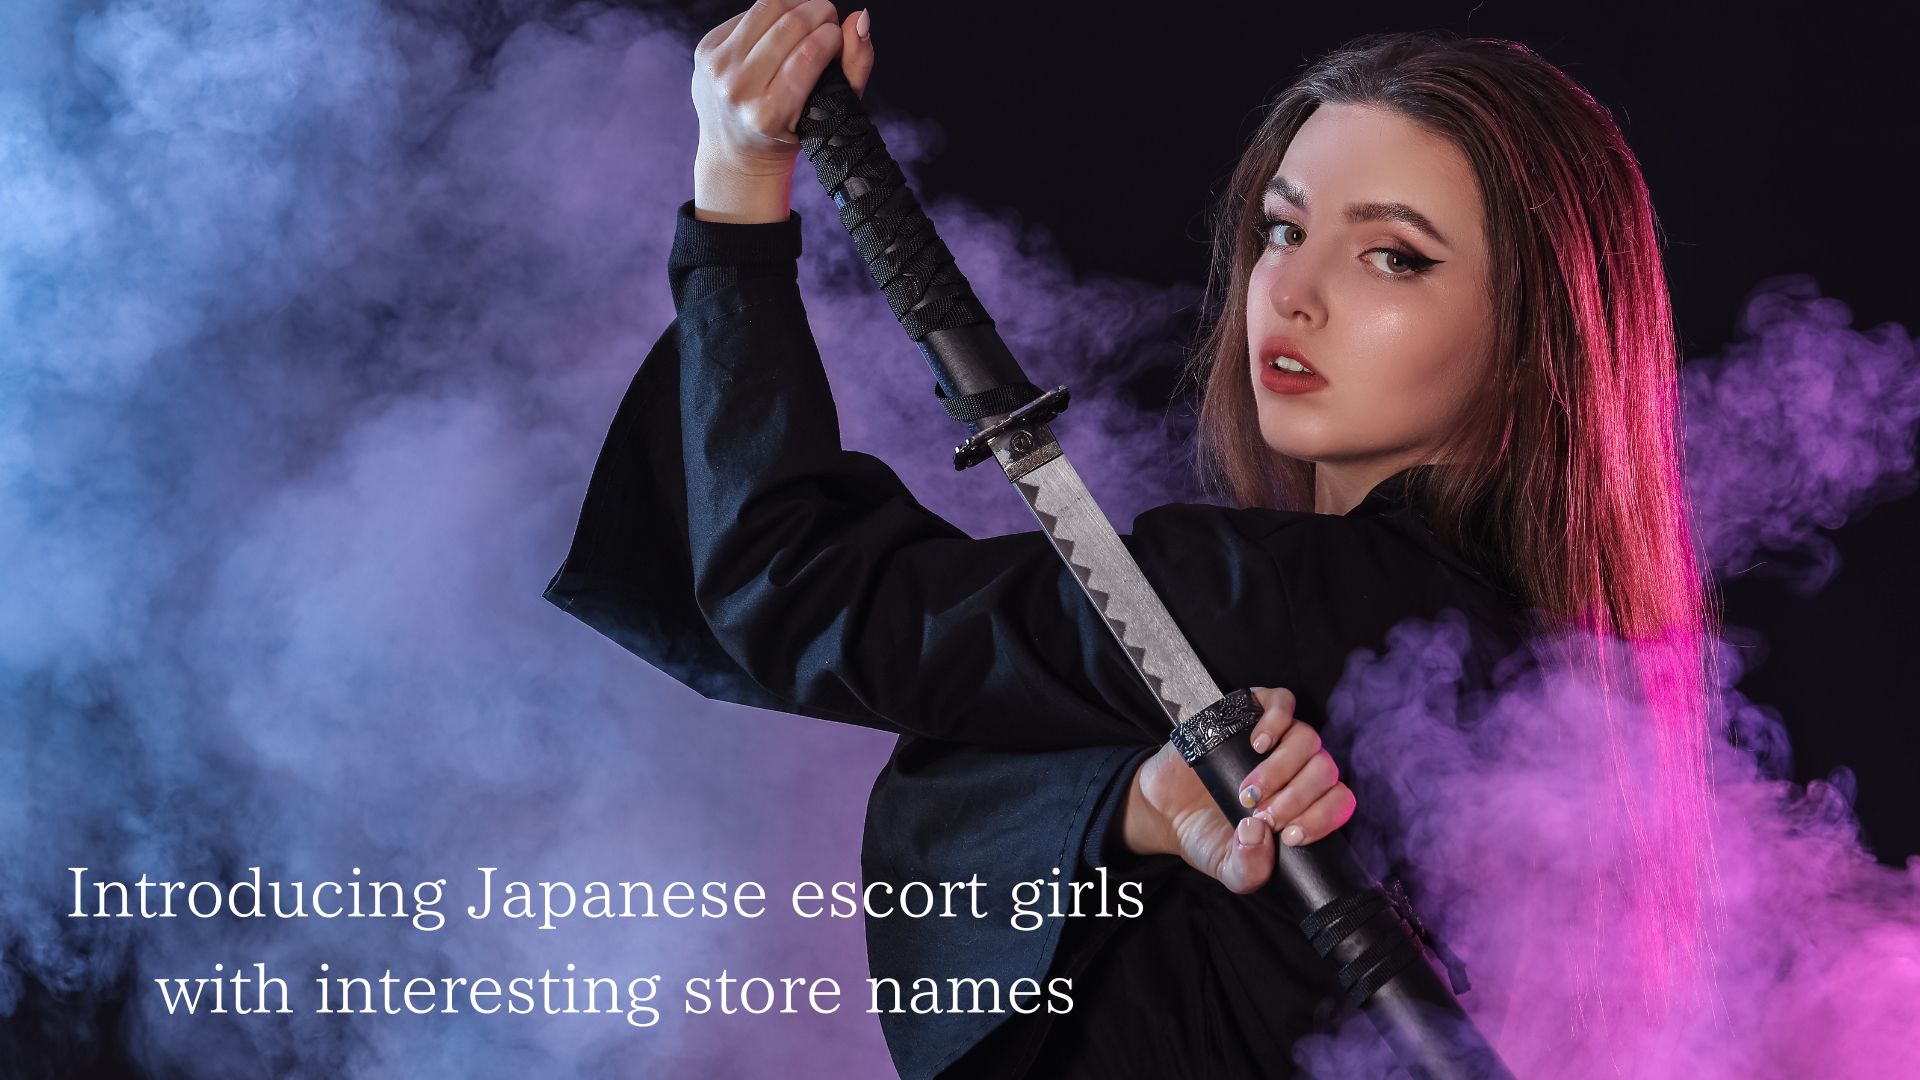 Introducing Japanese escort girls with interesting store names